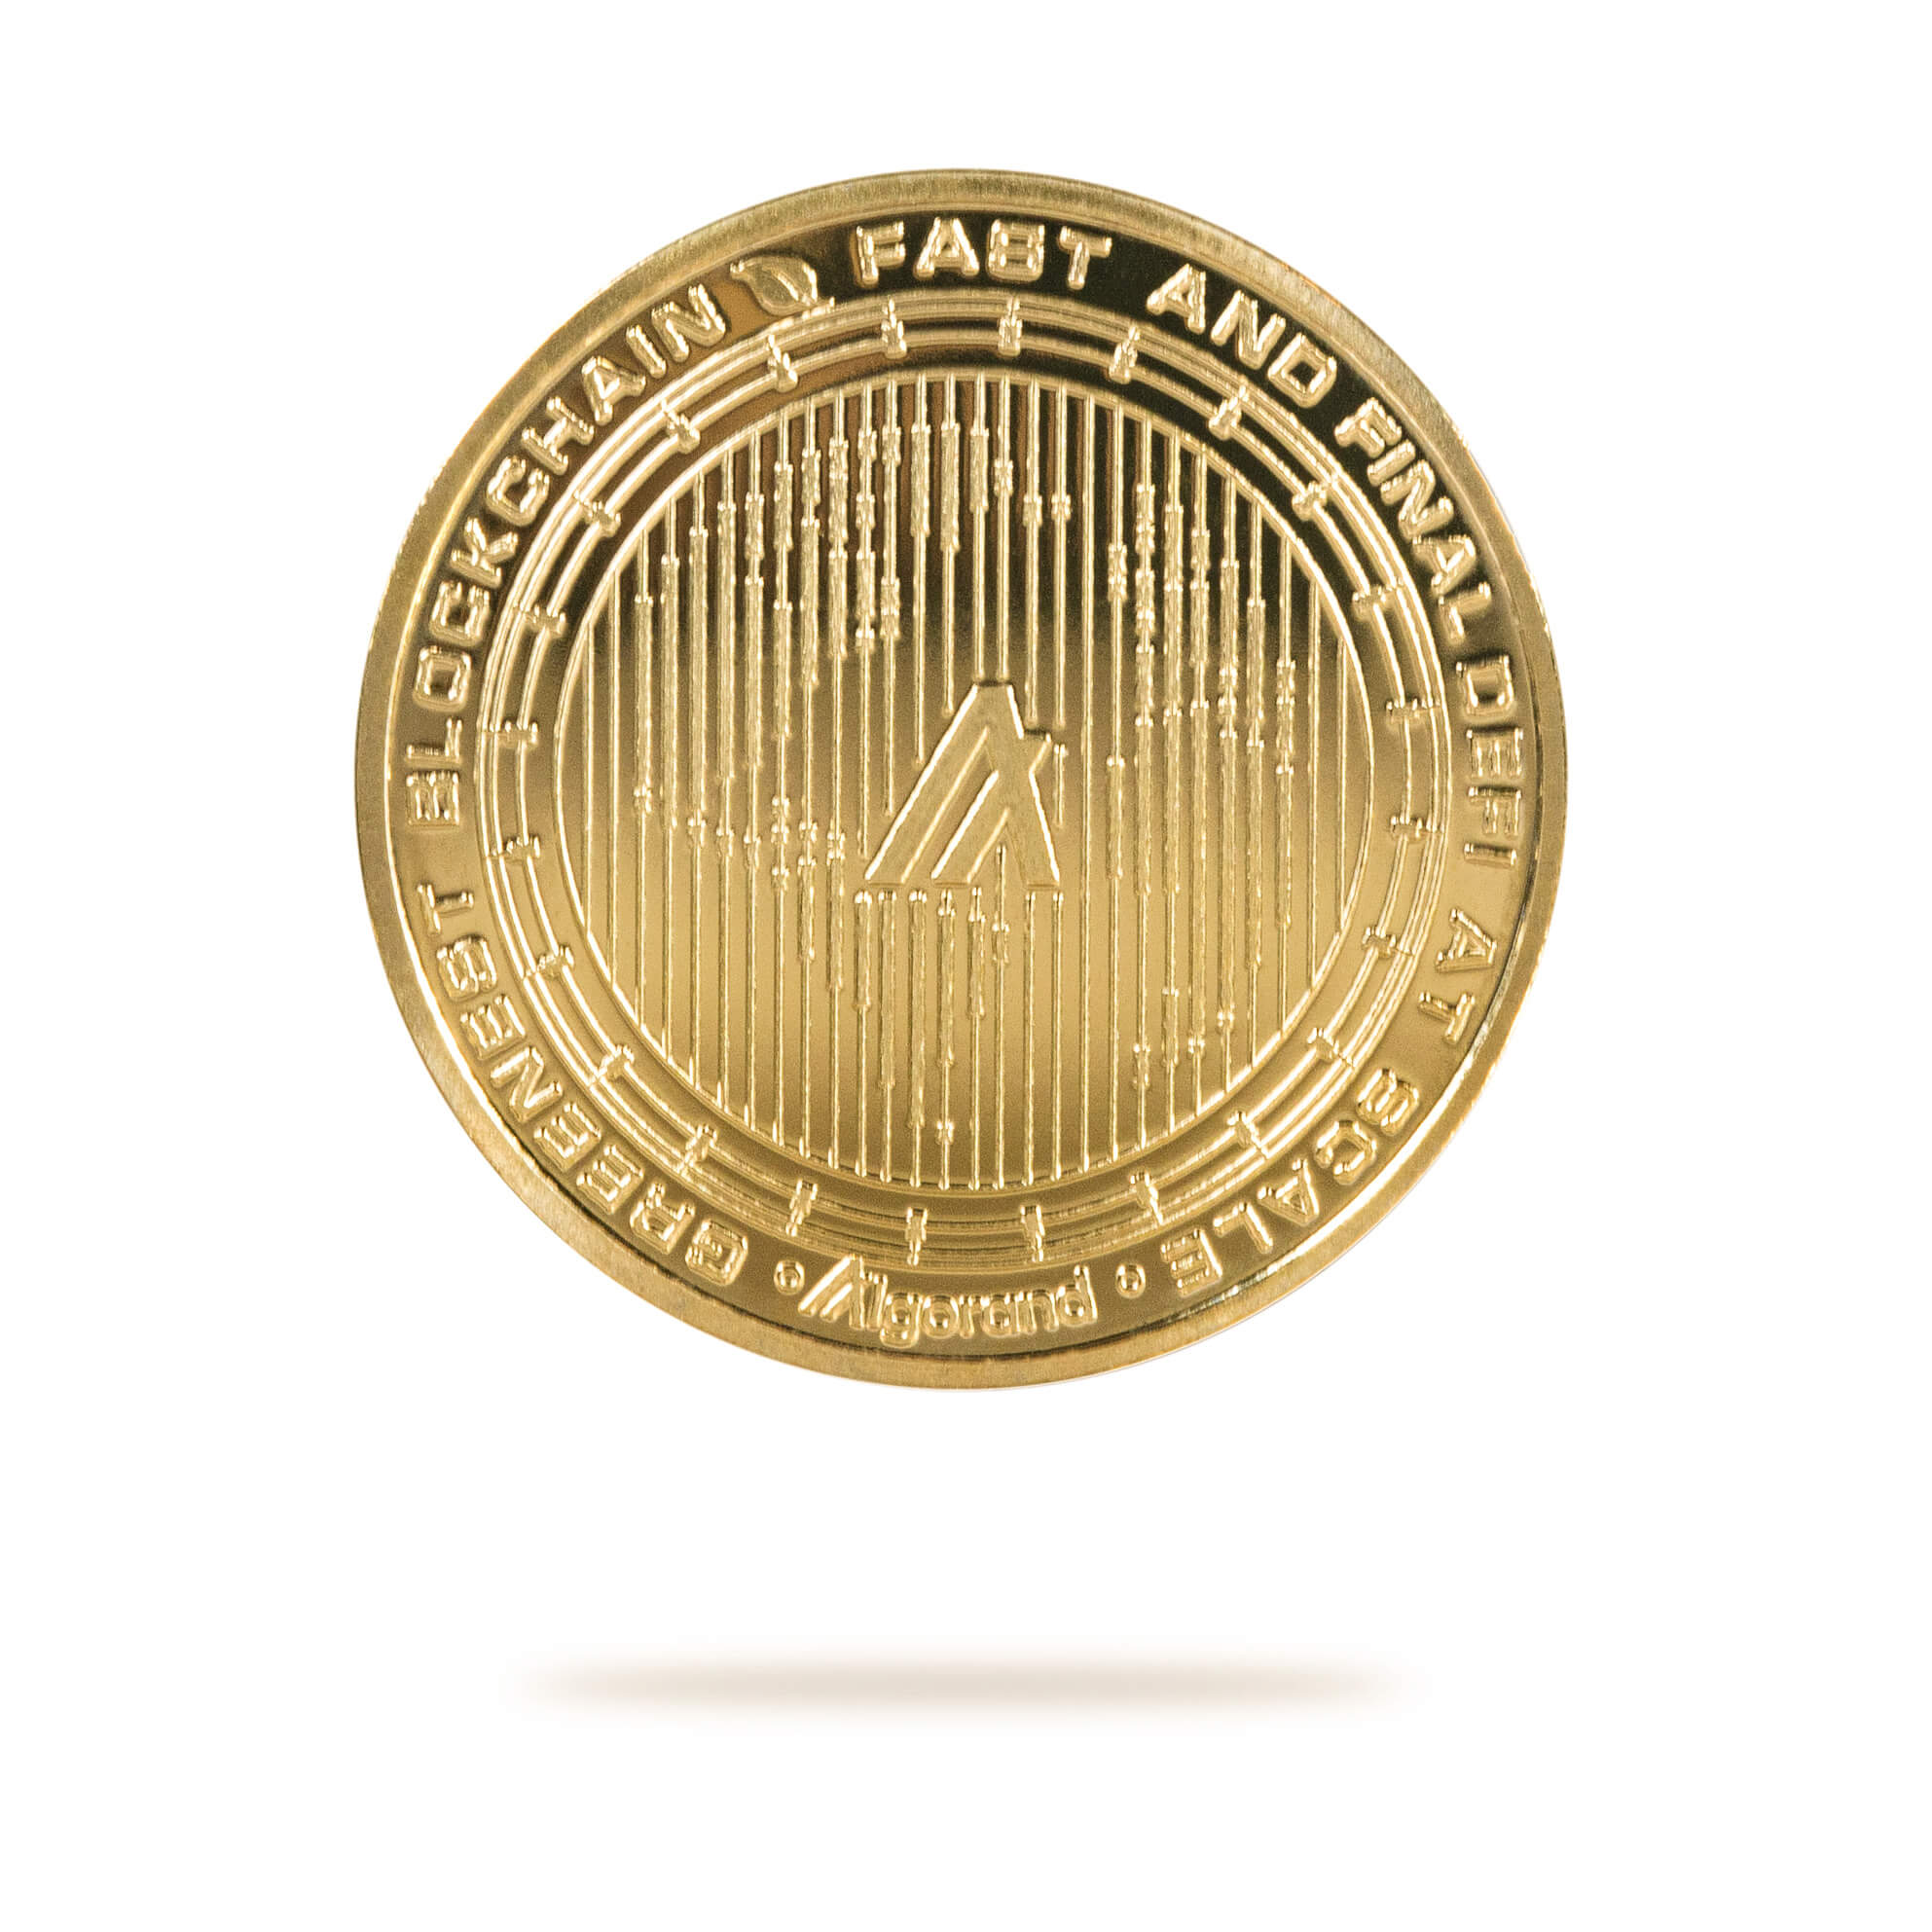 Cryptochips | Algorand Physical Crypto Coin. Collectable cryptocurrency merch you can hodl